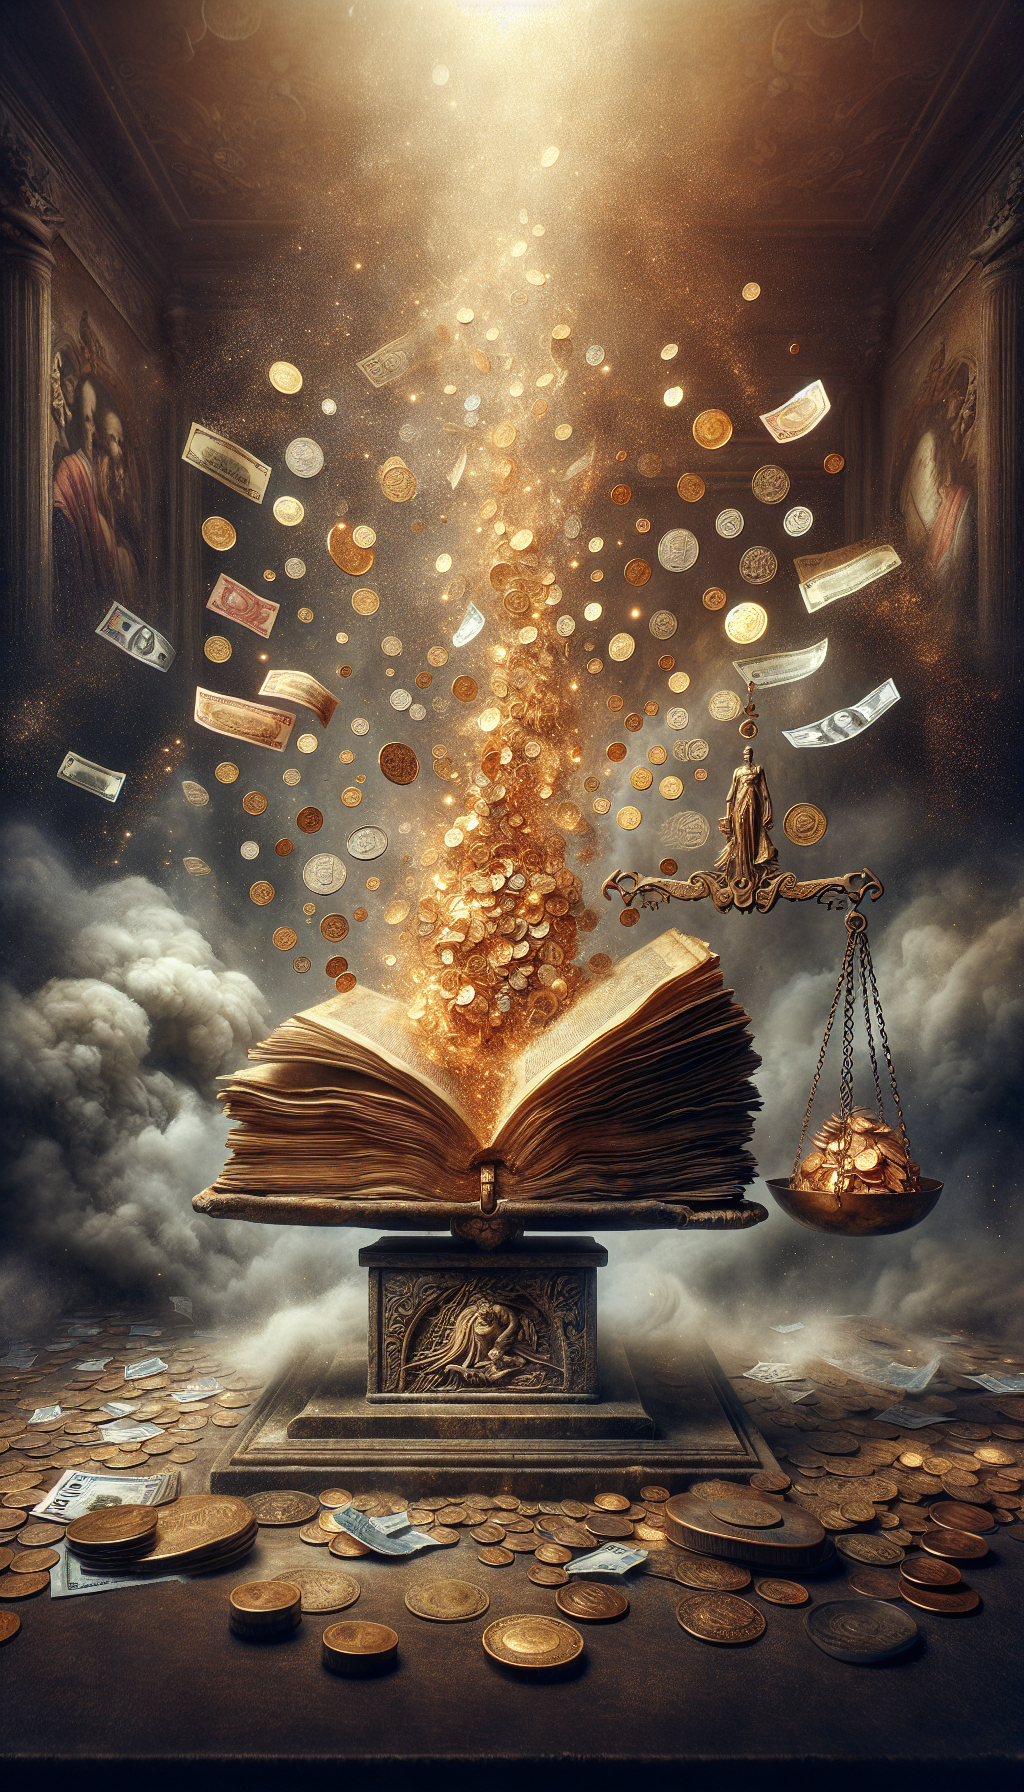 Amidst a mystical cloud of dust, an ancient tome sits atop a pedestal, with a stream of golden coins cascading from its pages onto a classic balance scale. Opposite the scale, modern currency notes rise, evoking a live trading market themed backdrop, symbolizing the tome's enduring monetary worth and merging antiquity with present-day valuation.